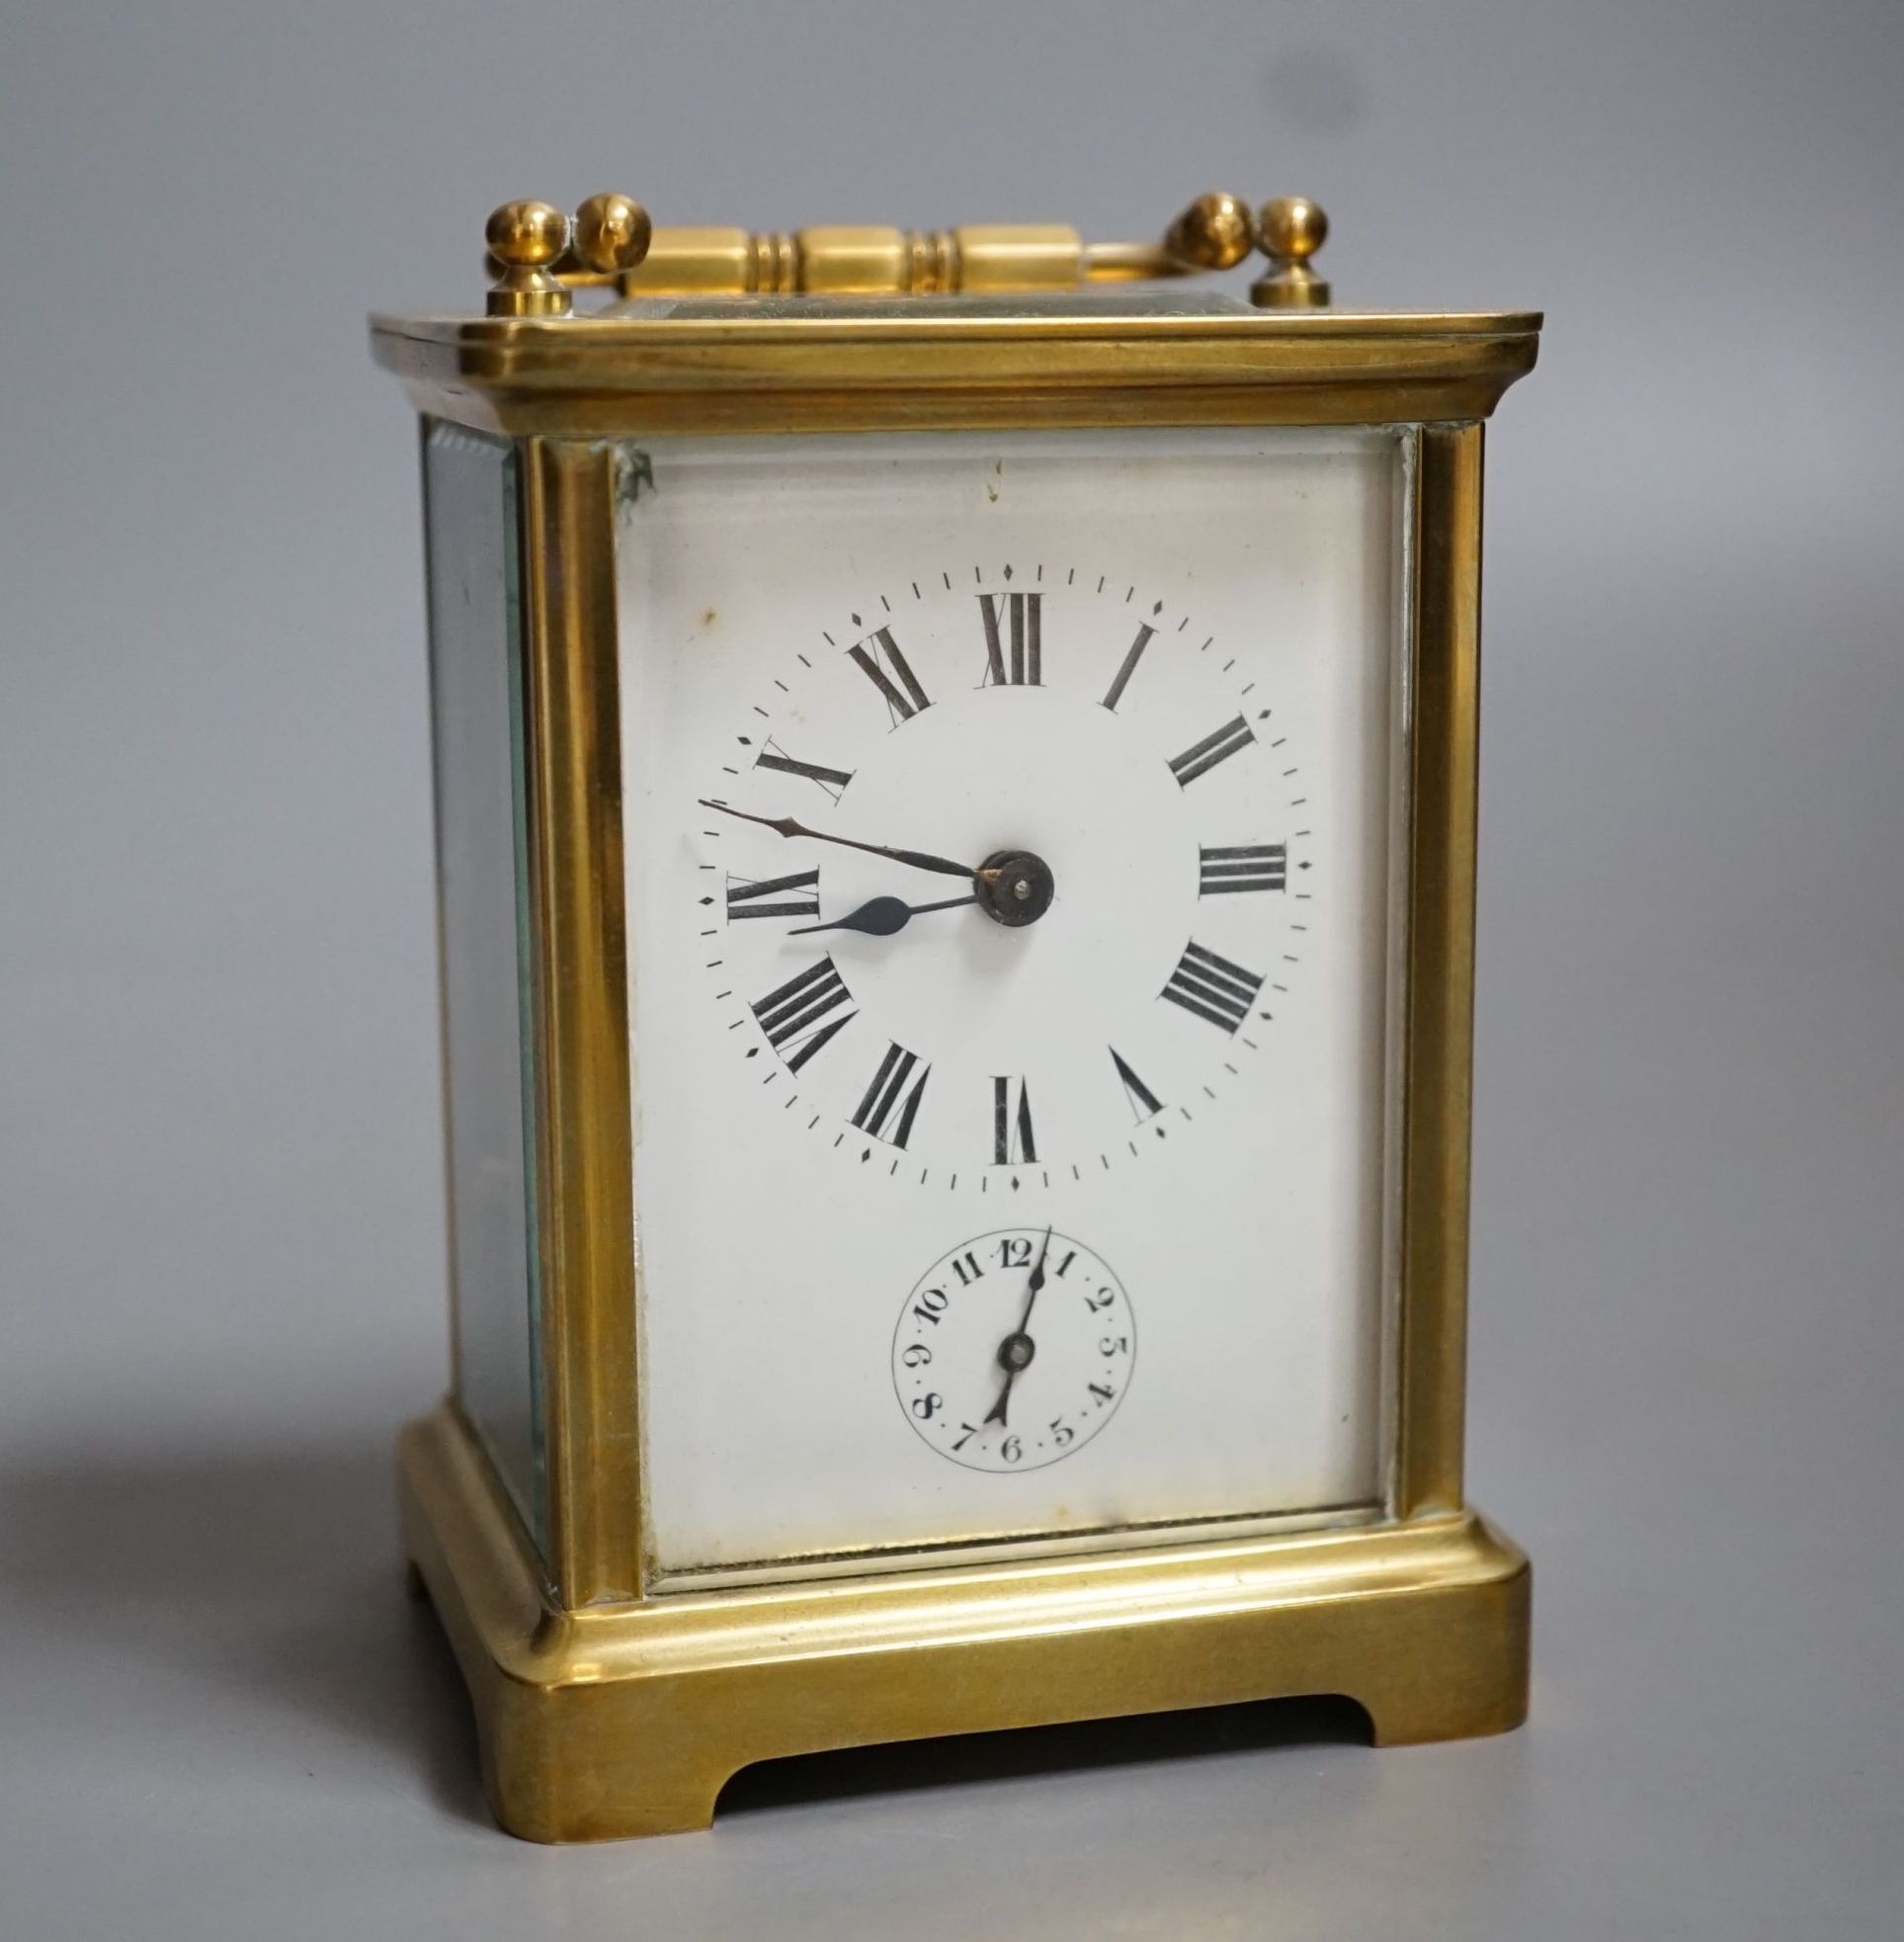 French carriage timepiece with original box and receipts - key included, 11cm high